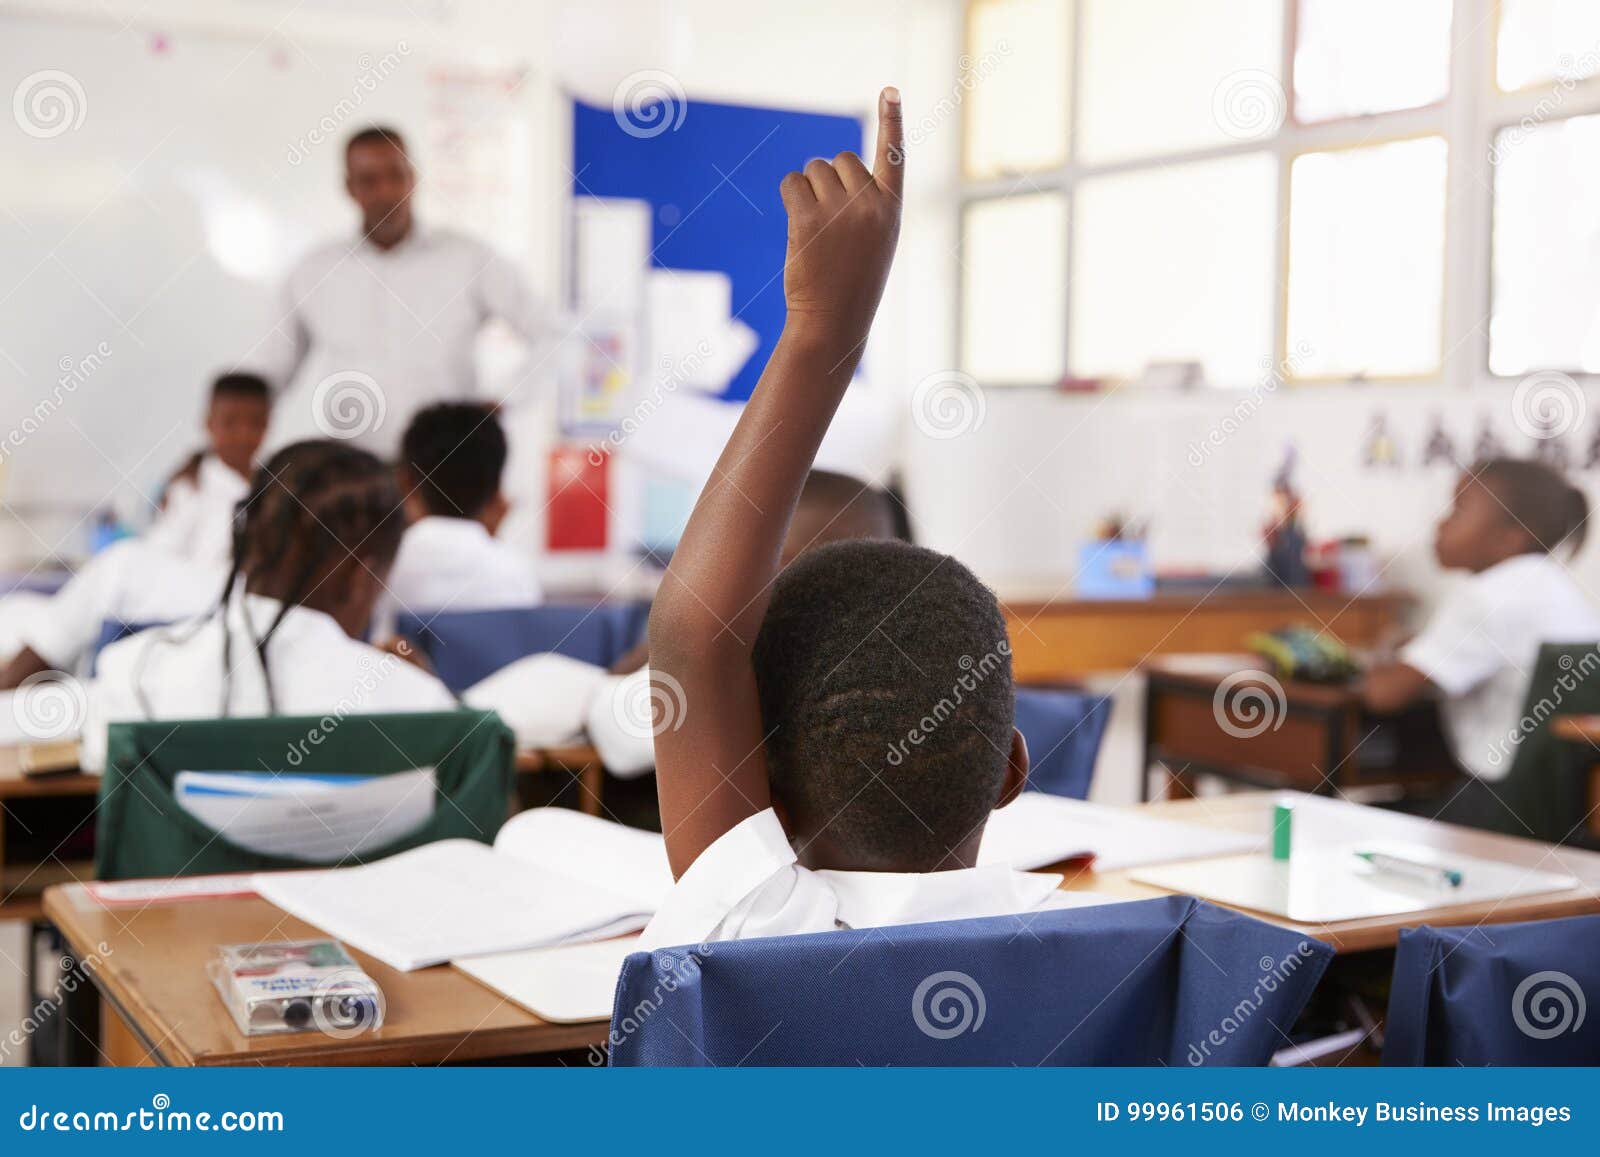 child raising hand to answer in an ary school lesson